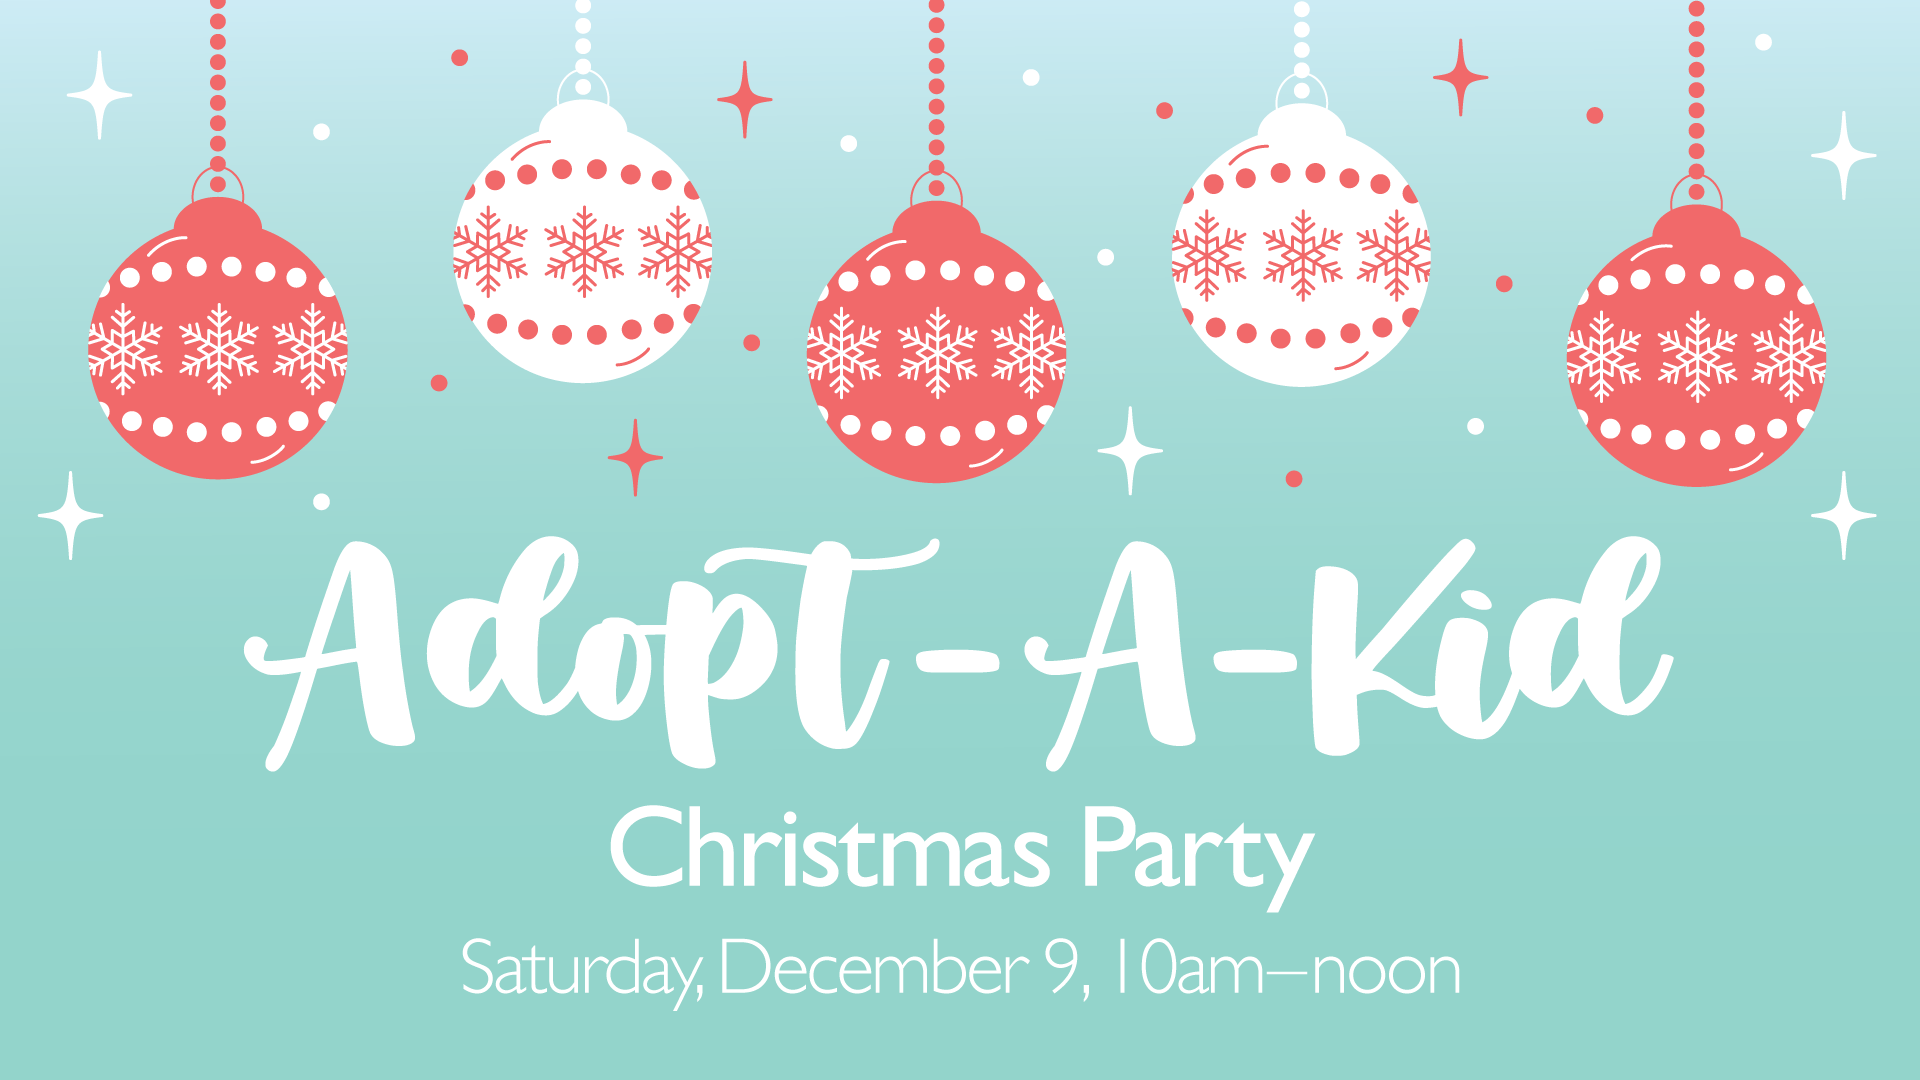 Adopt-A-Kid Christmas Party